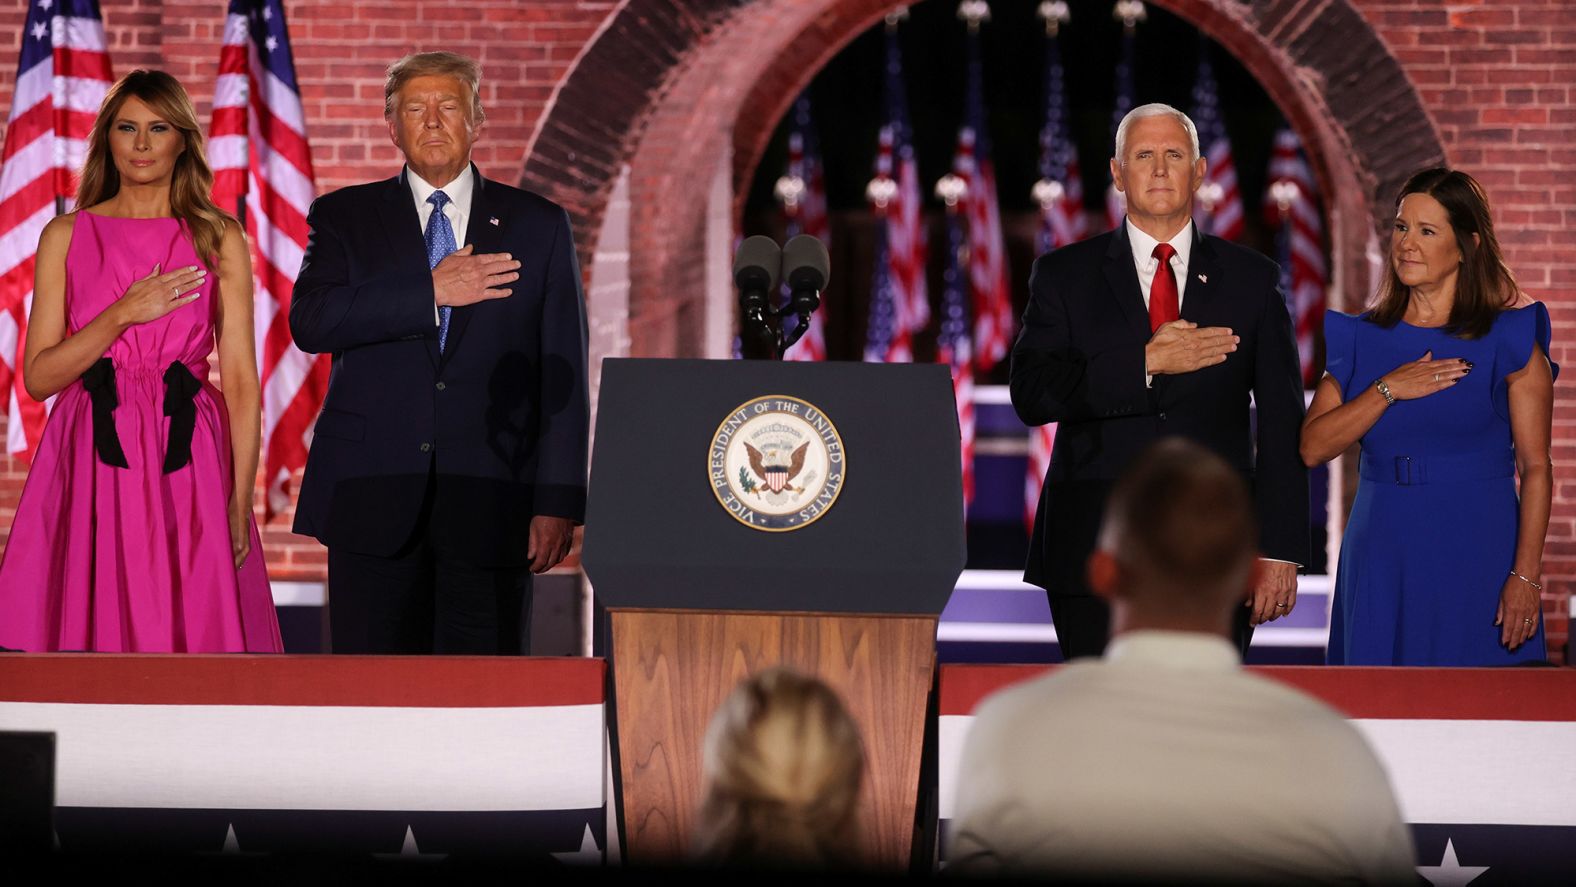 Vice President Mike Pence and his wife, Karen, are joined on stage by President Trump and the first lady after Pence's speech Wednesday. Pence spoke from Fort McHenry in Baltimore.